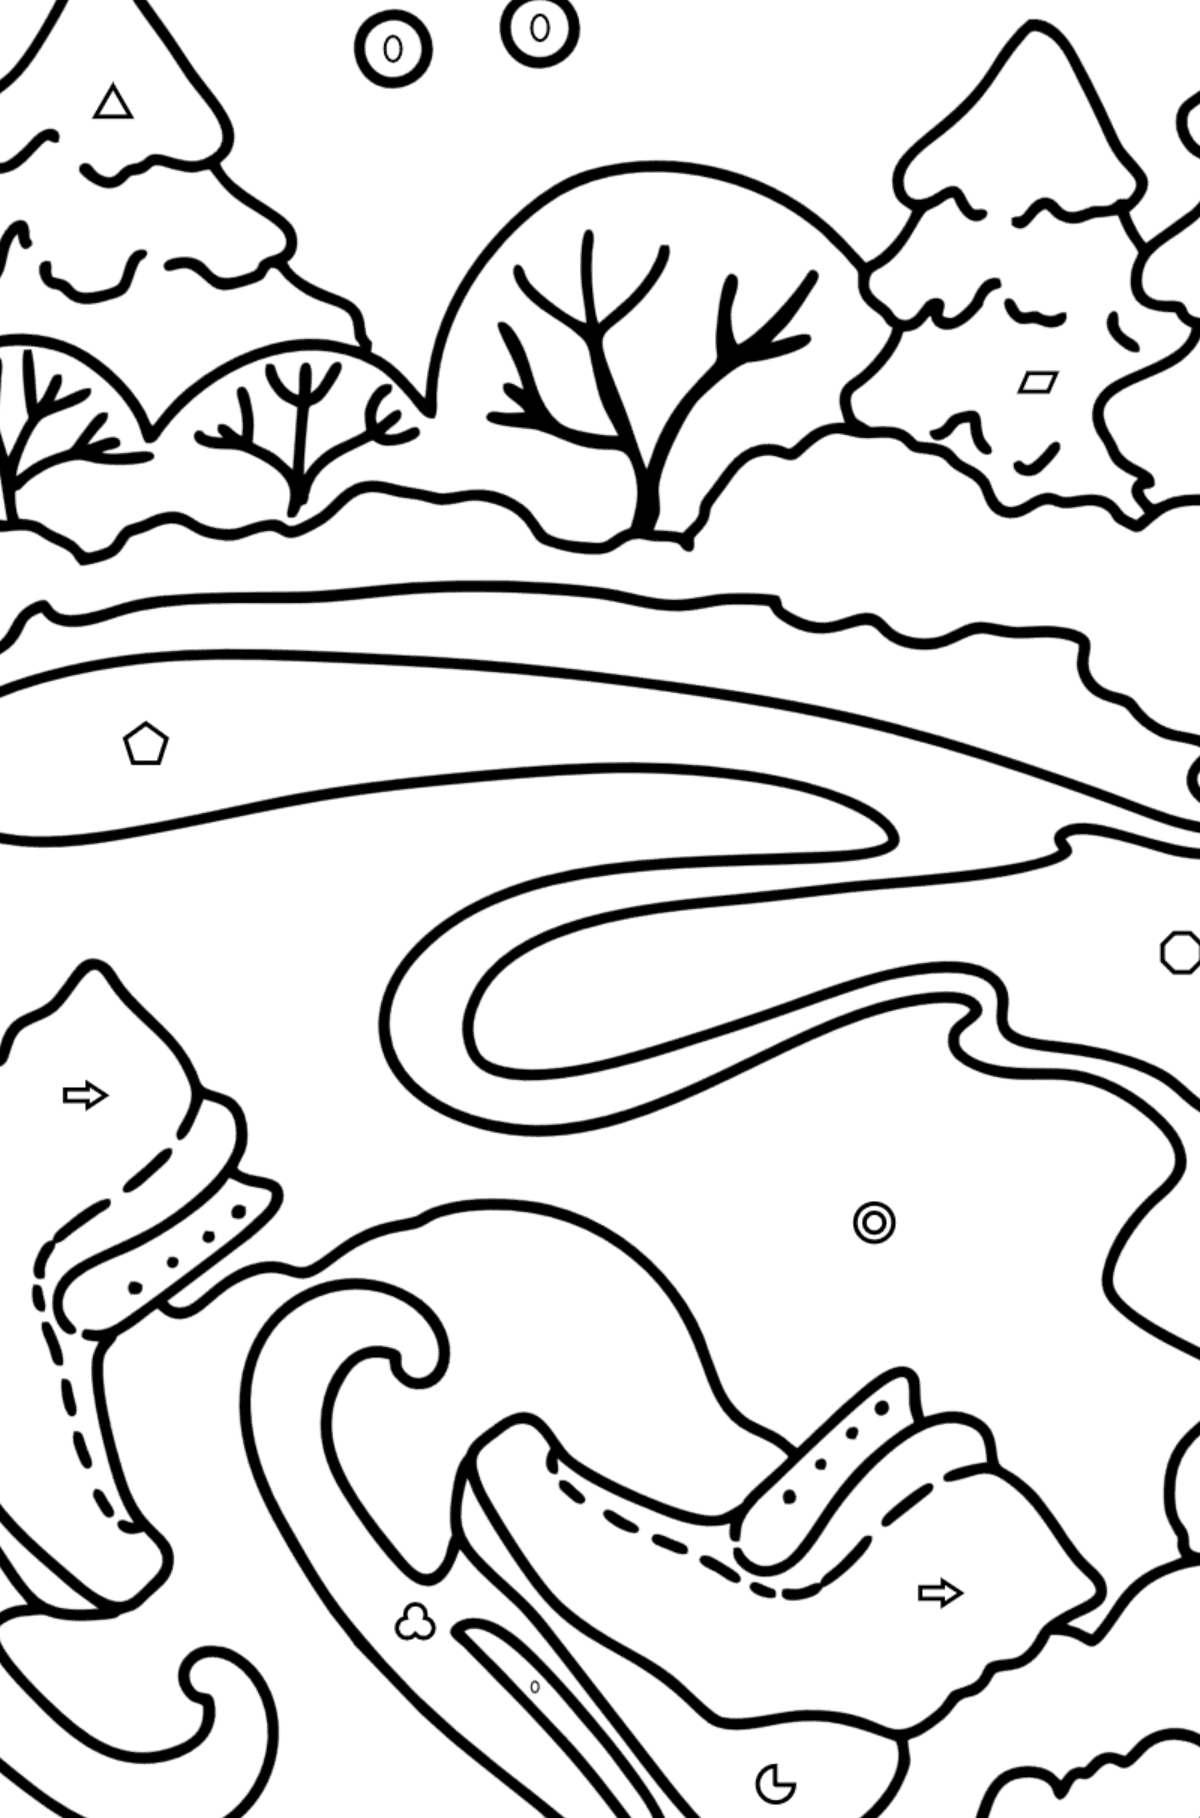 Coloring page - Winter and skates - Coloring by Geometric Shapes for Kids